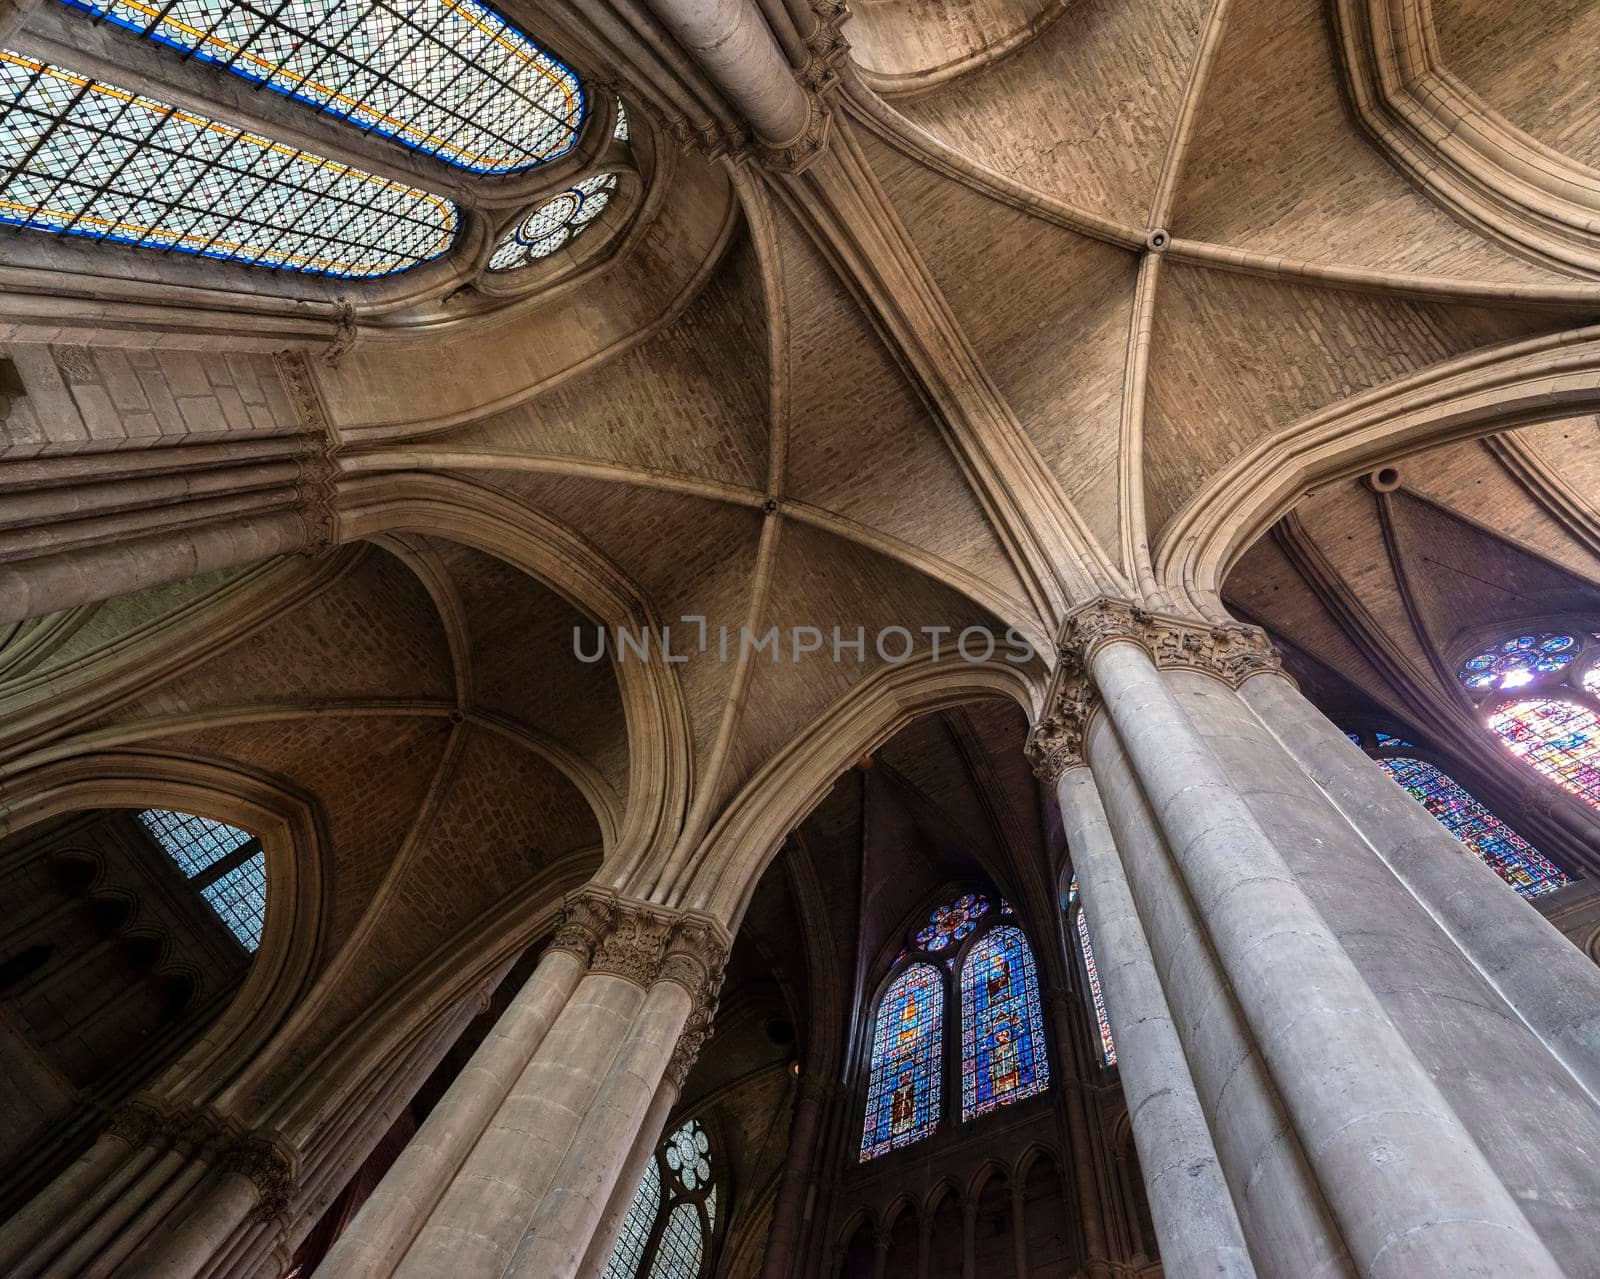 vaults, pillars and stained glass windows inside cathedral of reims in the north of france